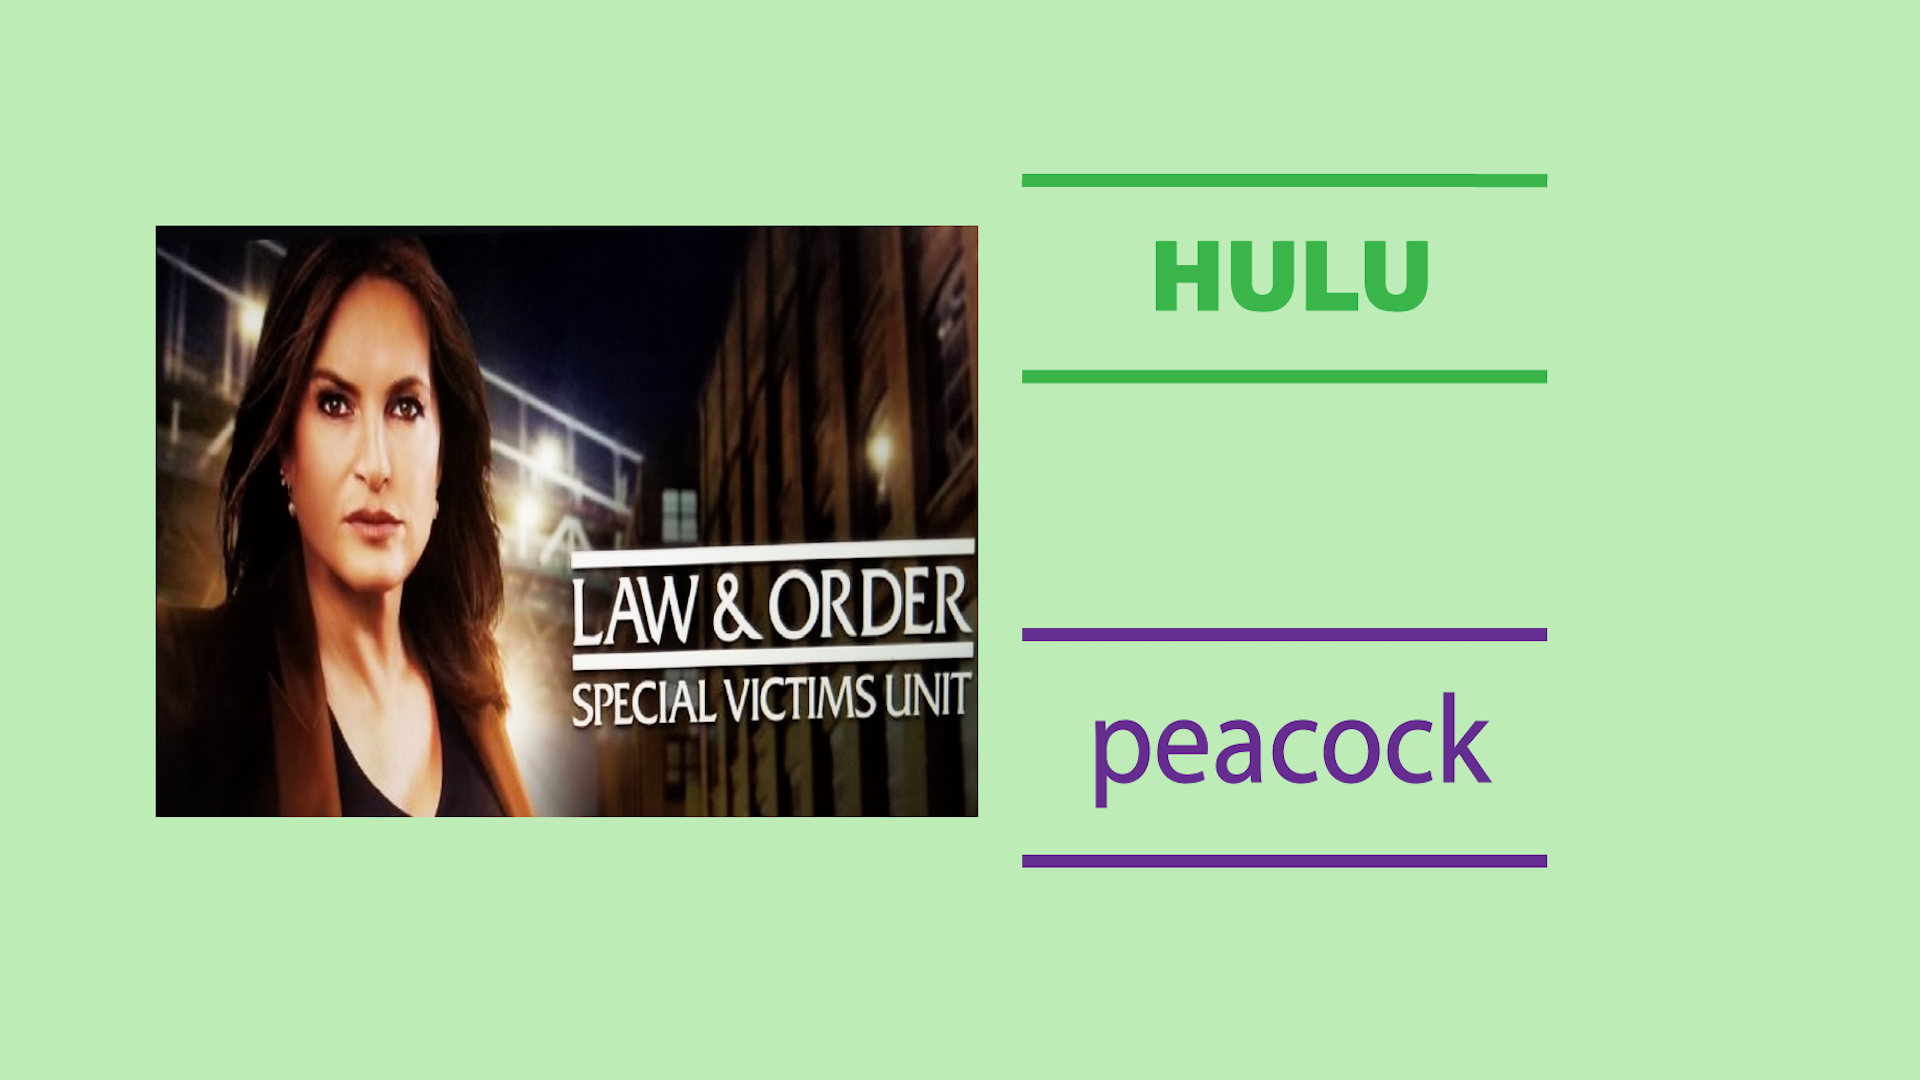 Image of Law and Order SVU screenshot with Hulu and Peacock text